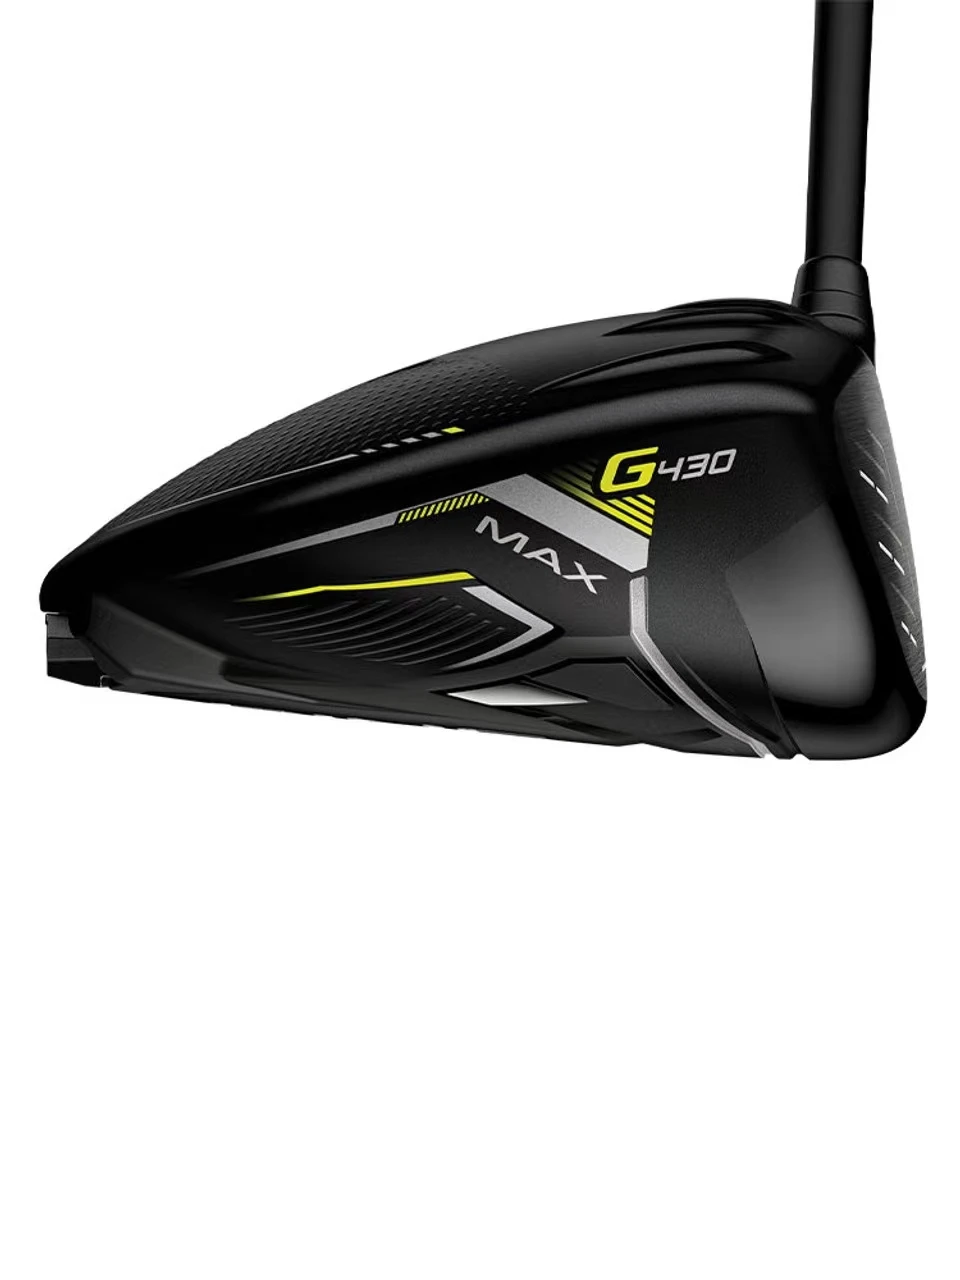 

2023 MAX G430 Drivers Golf Clubs Alta CB Black Shafts Optimized T9S+ Forged Face